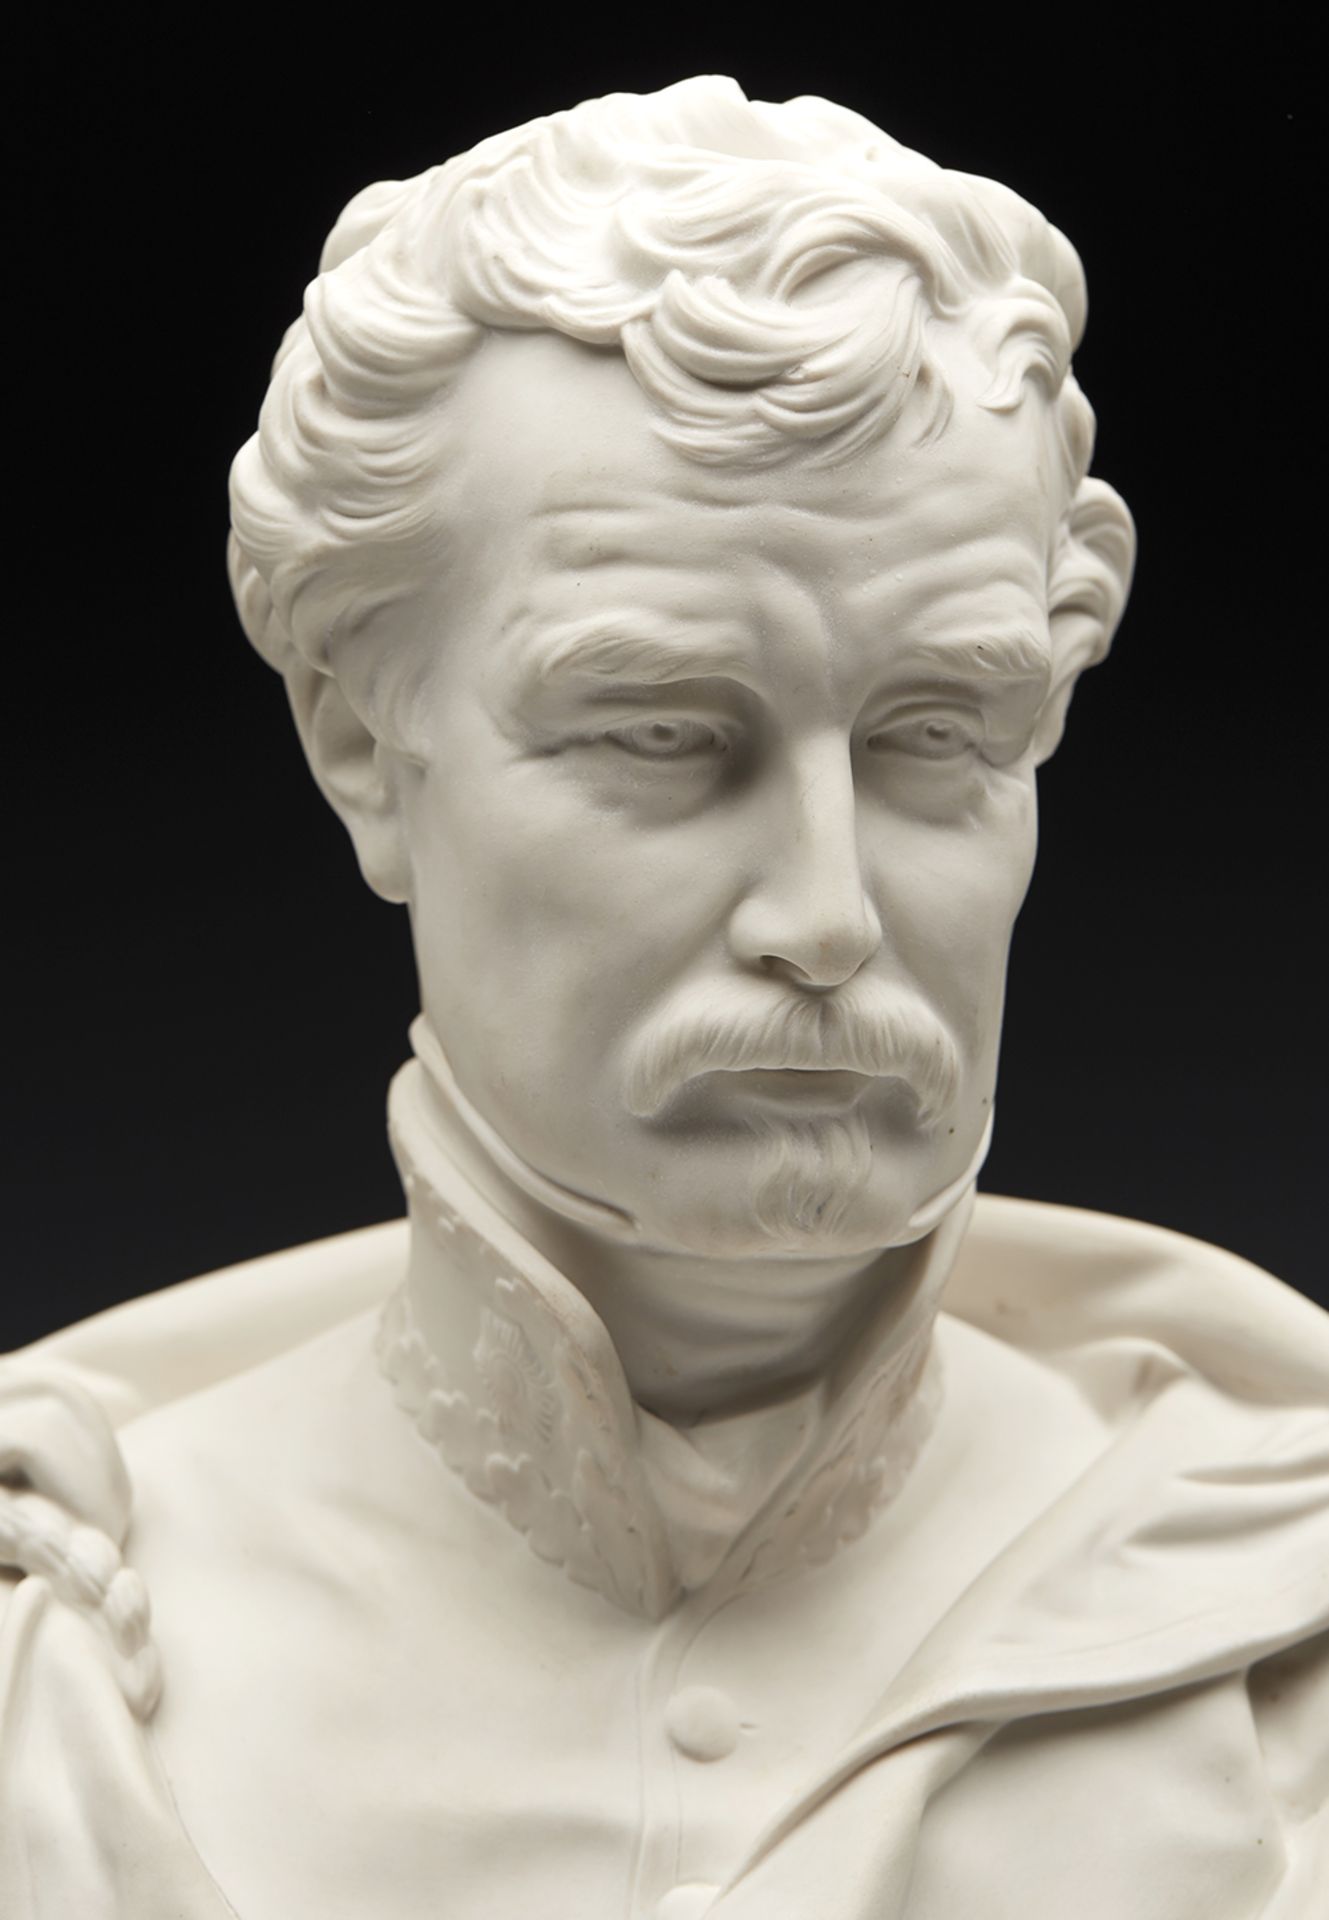 ANTIQUE RIDGWAY PARIAN BUST OF SIR COLIN CAMPBELL BY J DURHAM 1858 - Image 2 of 12